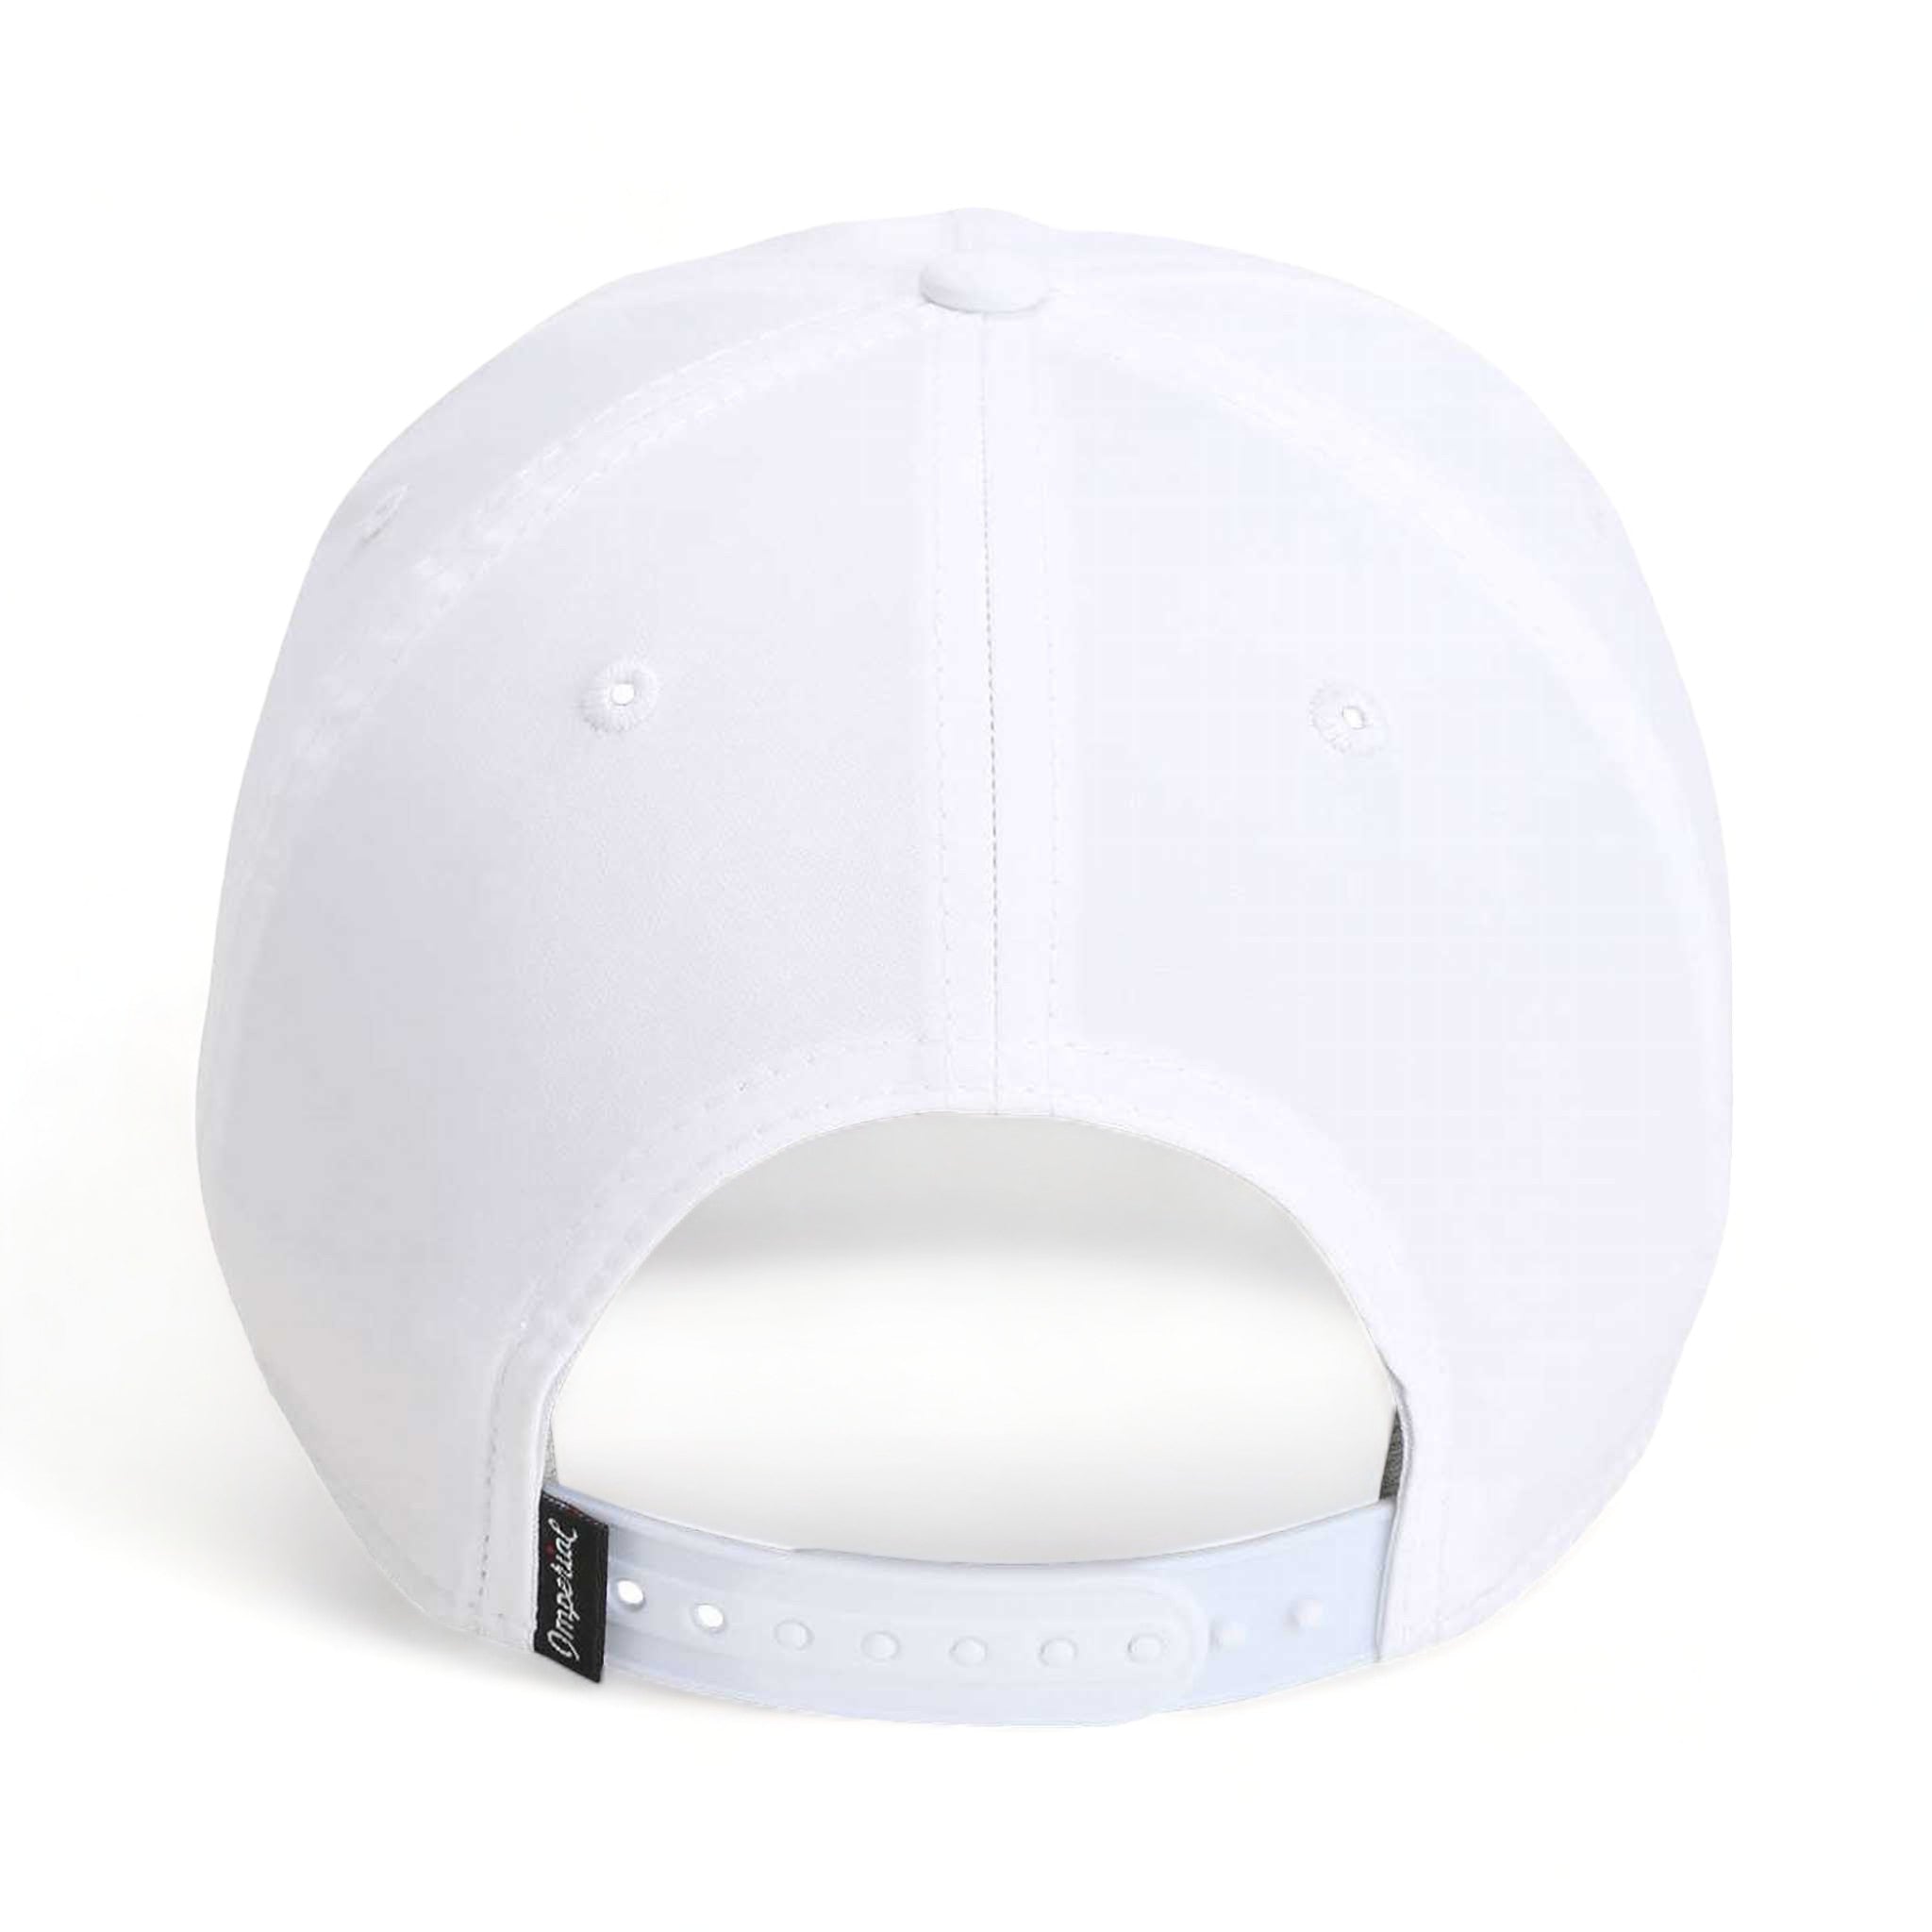 Back view of Imperial 5054 custom hat in white and light blue-red